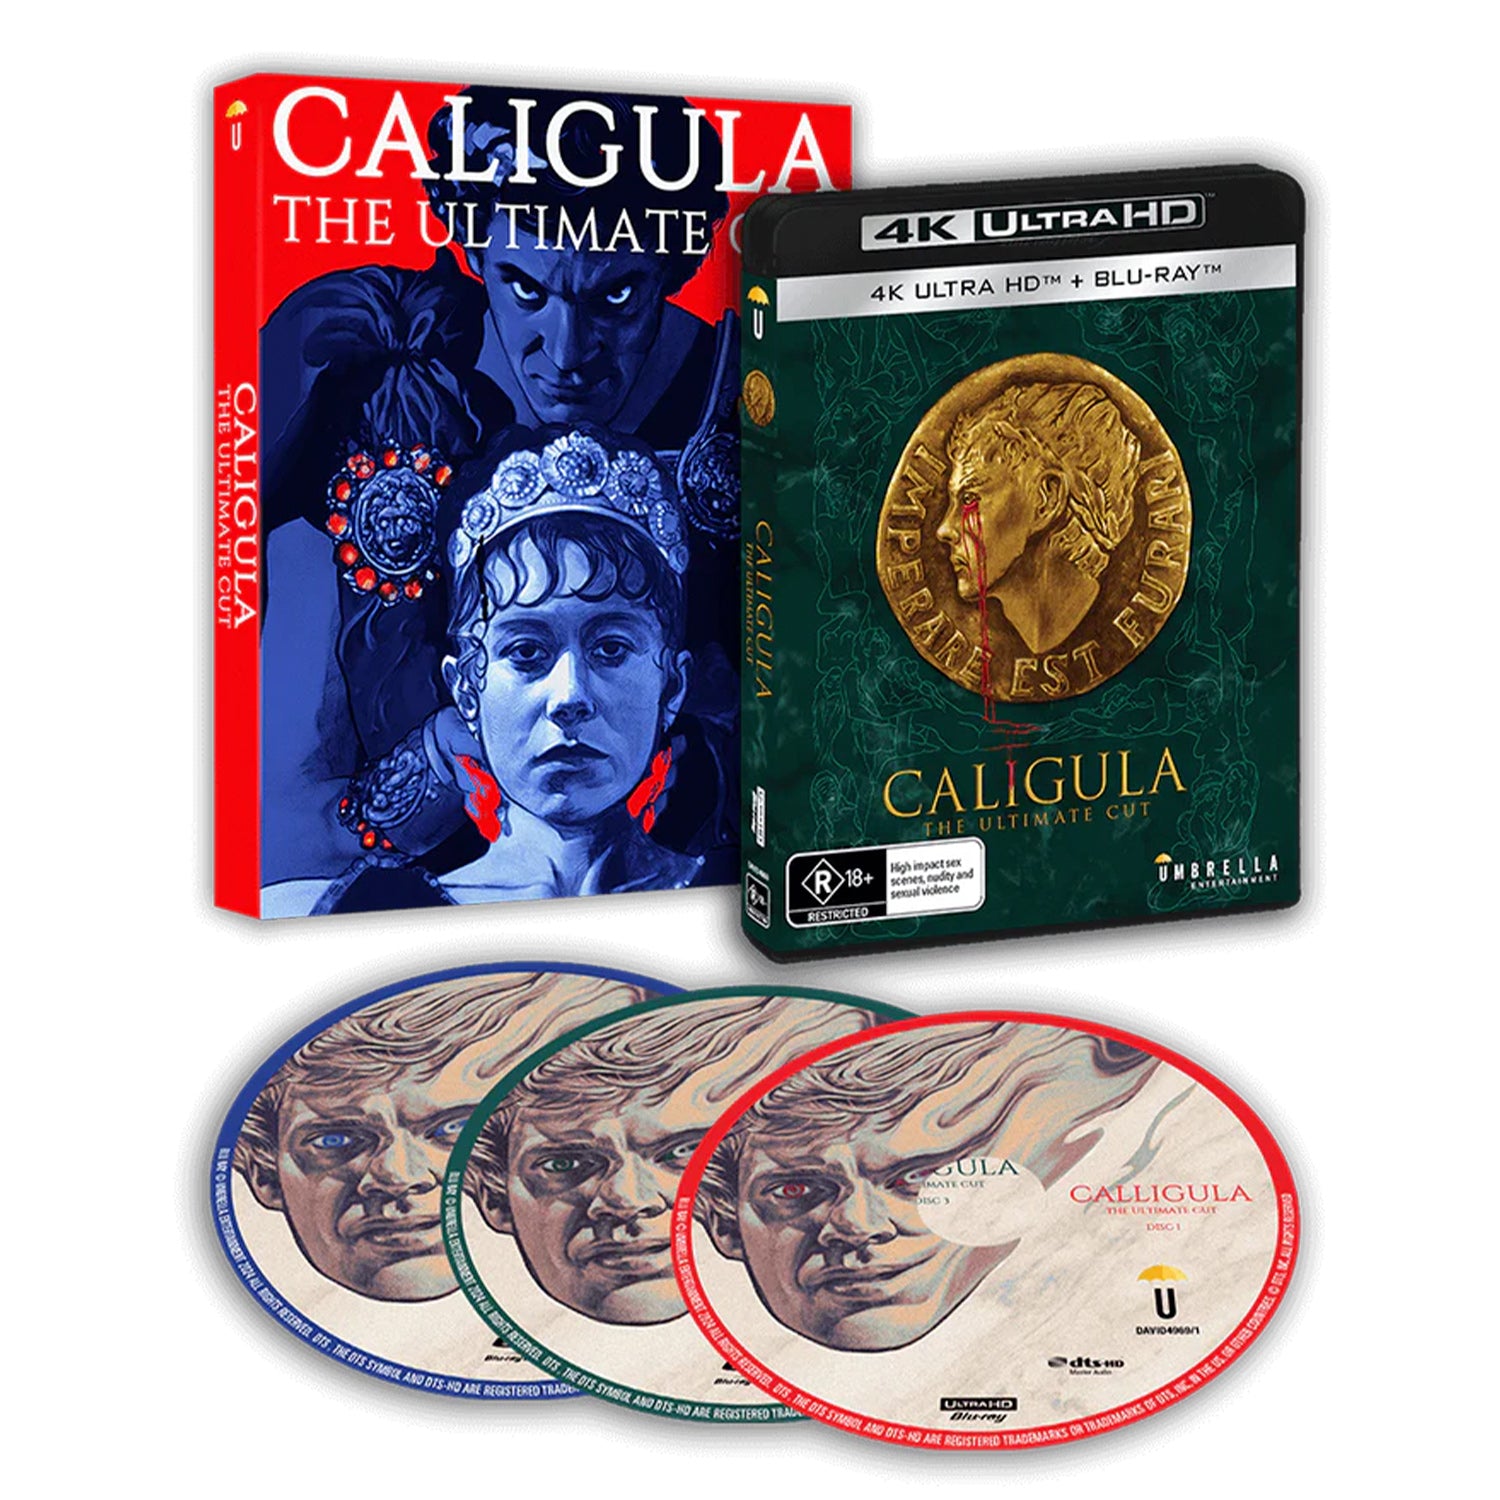 ABSOLUTE POWER Caligula: The Ultimate Cut (1979/2023) Collector's Edition  (4K + 2 Blu-ray + 2 Books + Magazine + Rigid case + Slipcase + 2 Posters + Artcards)